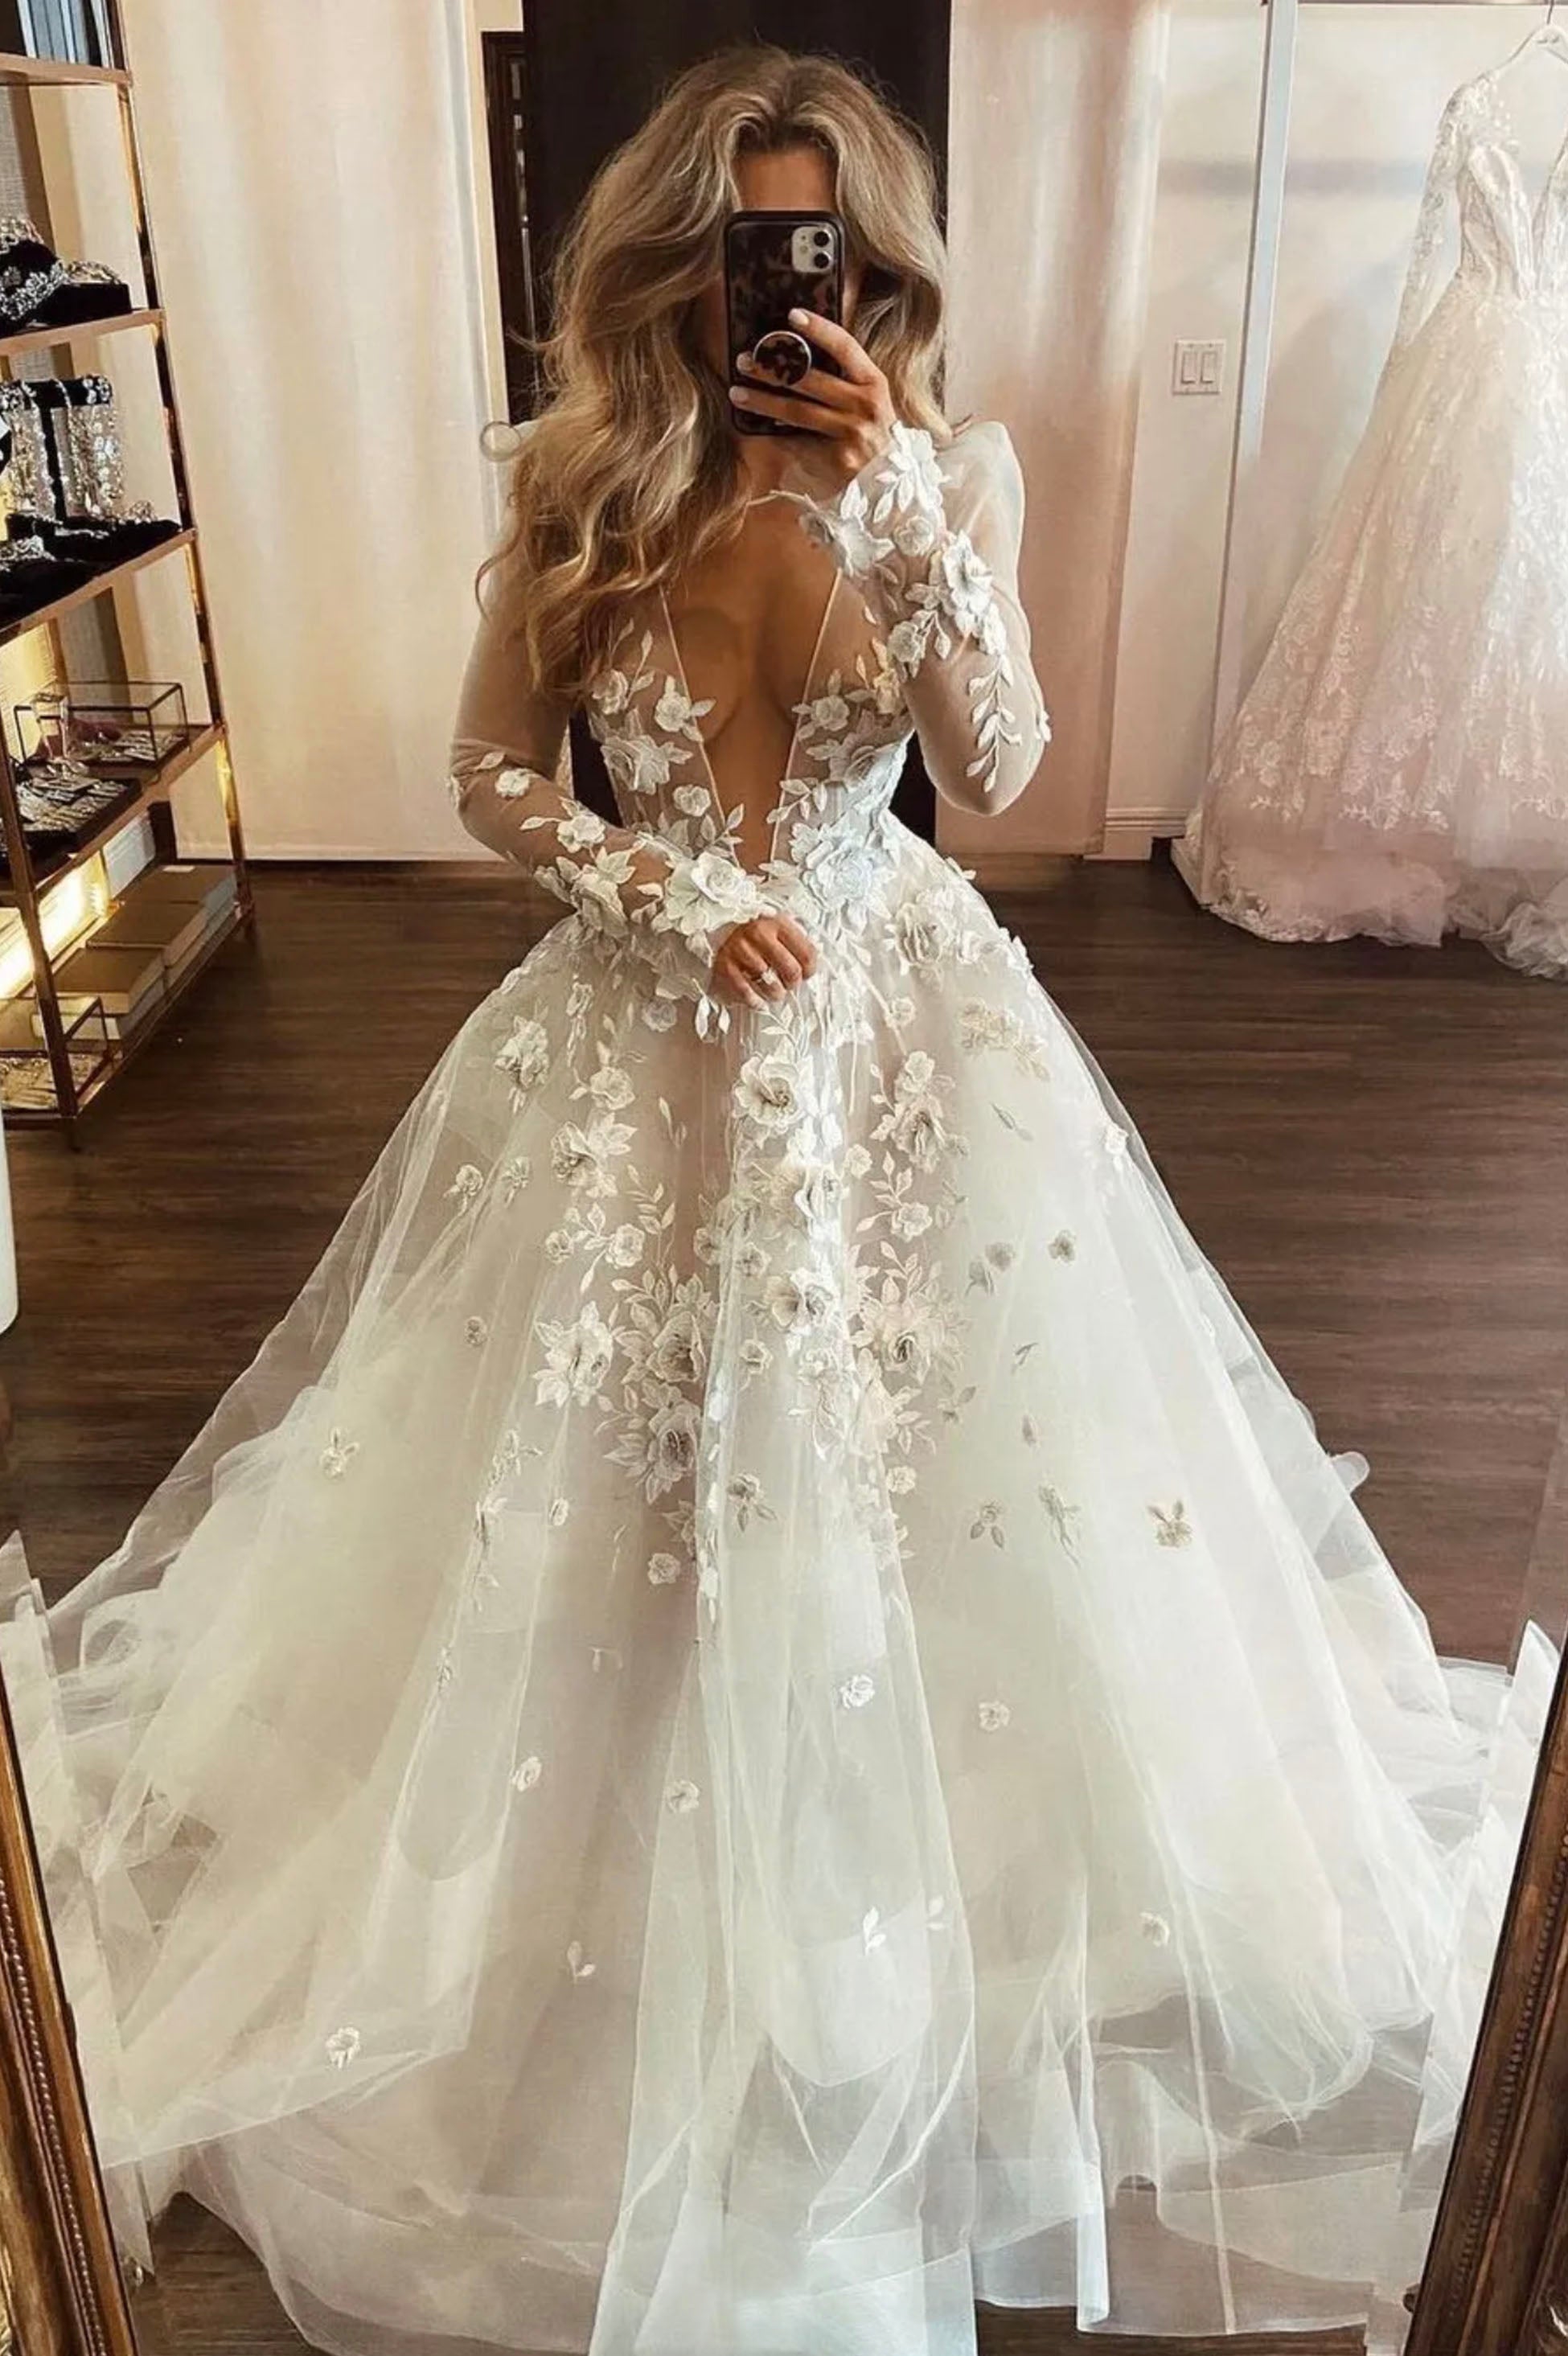 Plunging V-Neck Lace Long Prom Dress, White Long Sleeve Evening Party